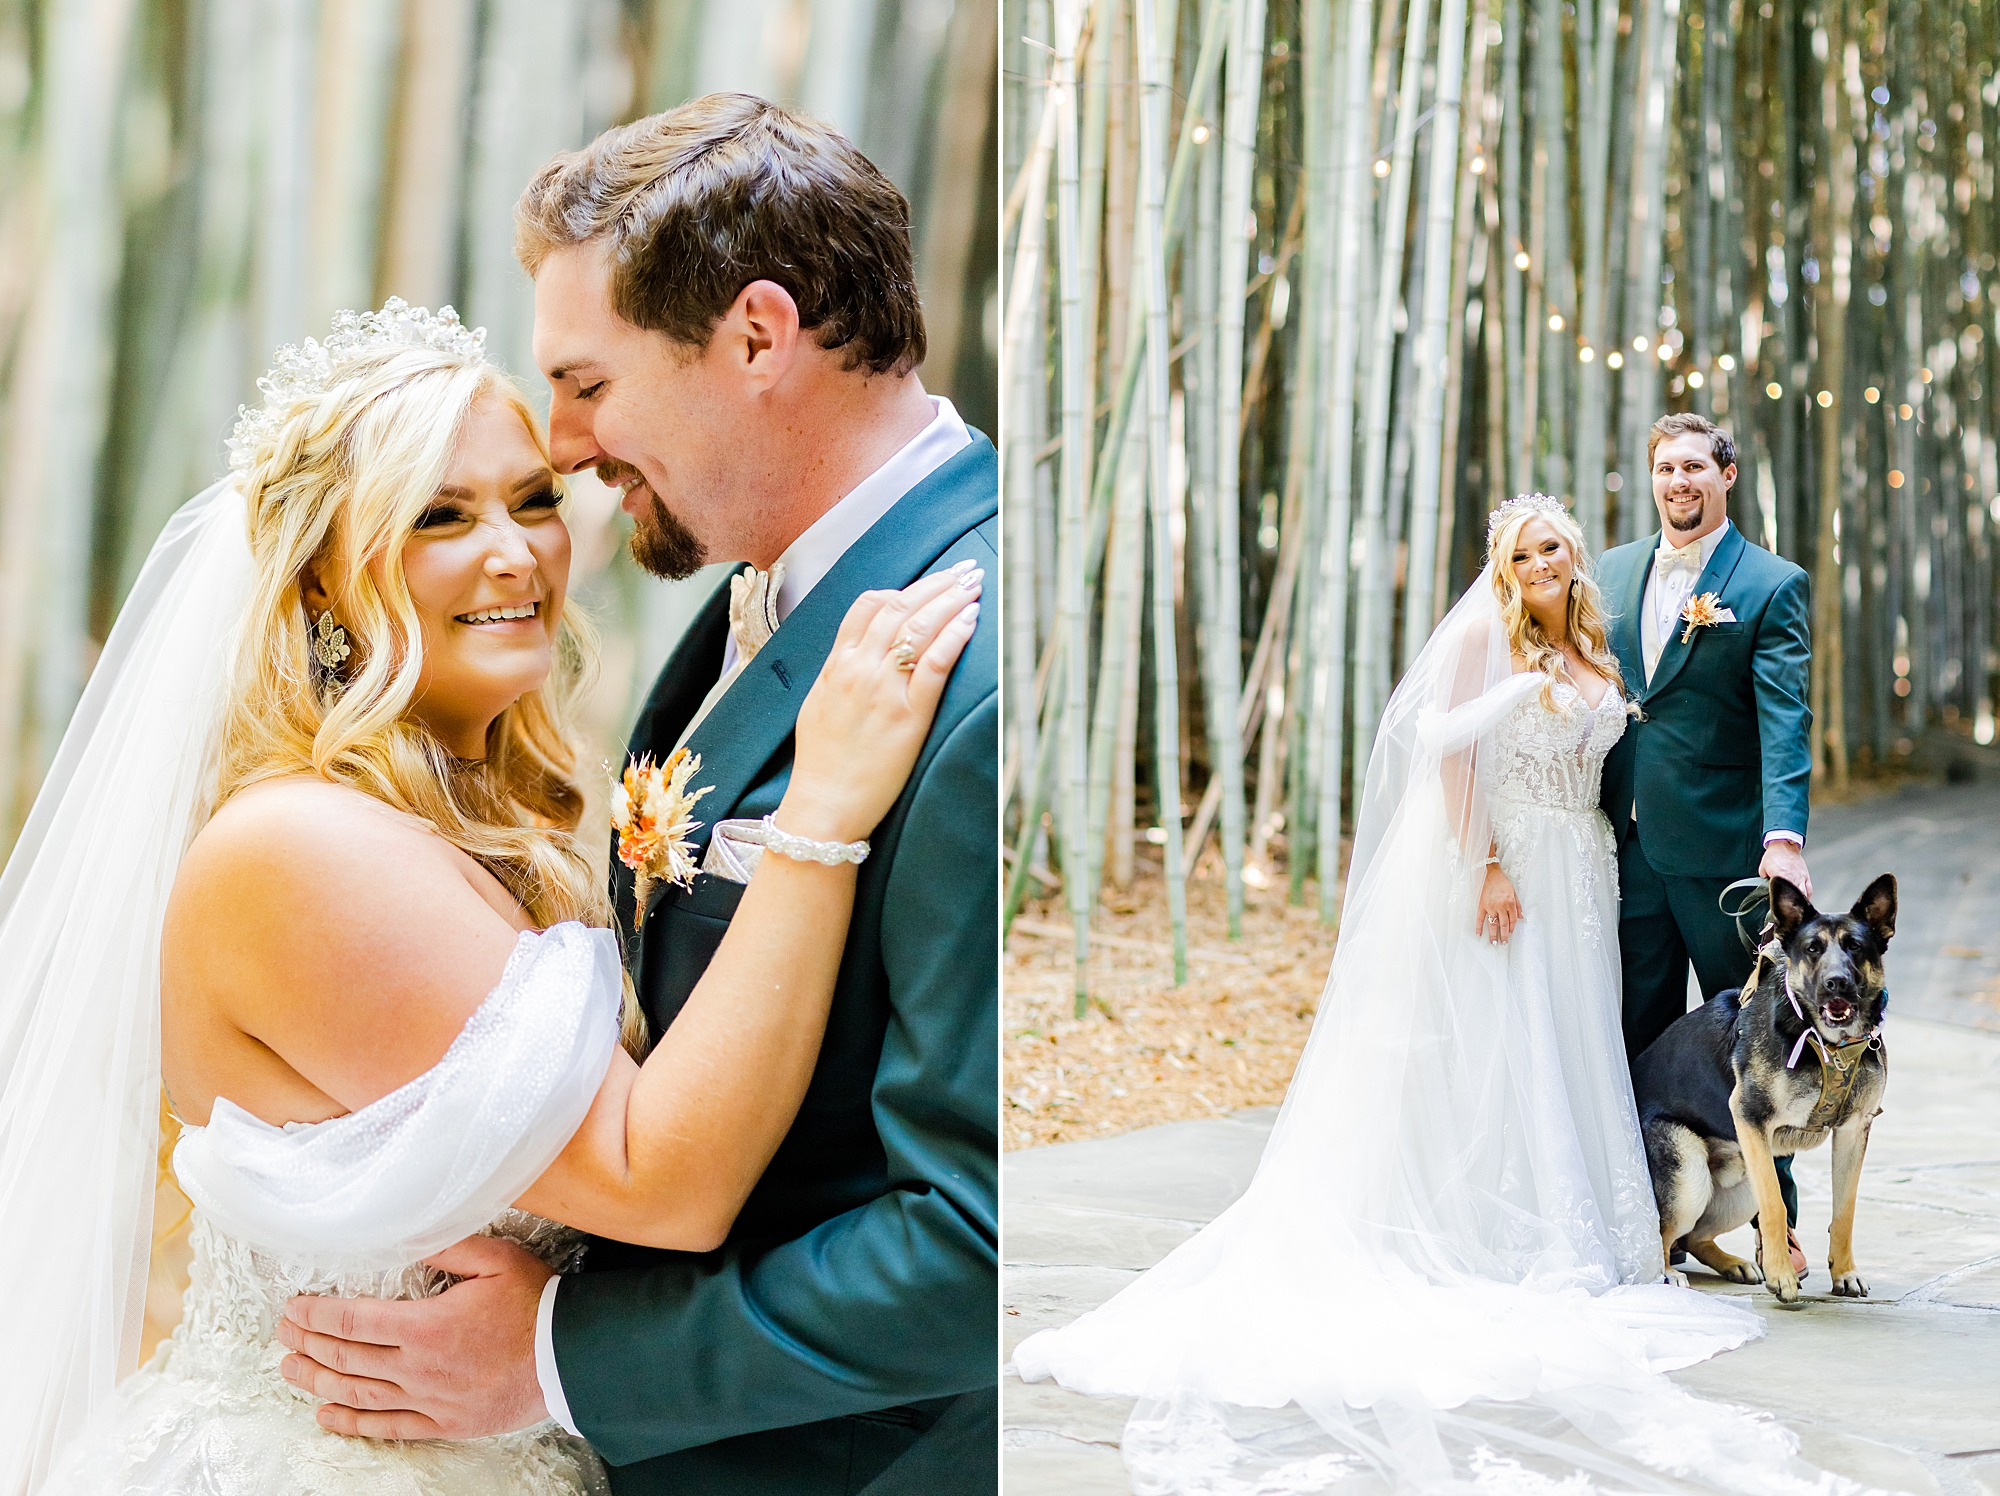 groom leans to nuzzle bride's forehead during portraits in bamboo forest at Camelot Meadows wedding